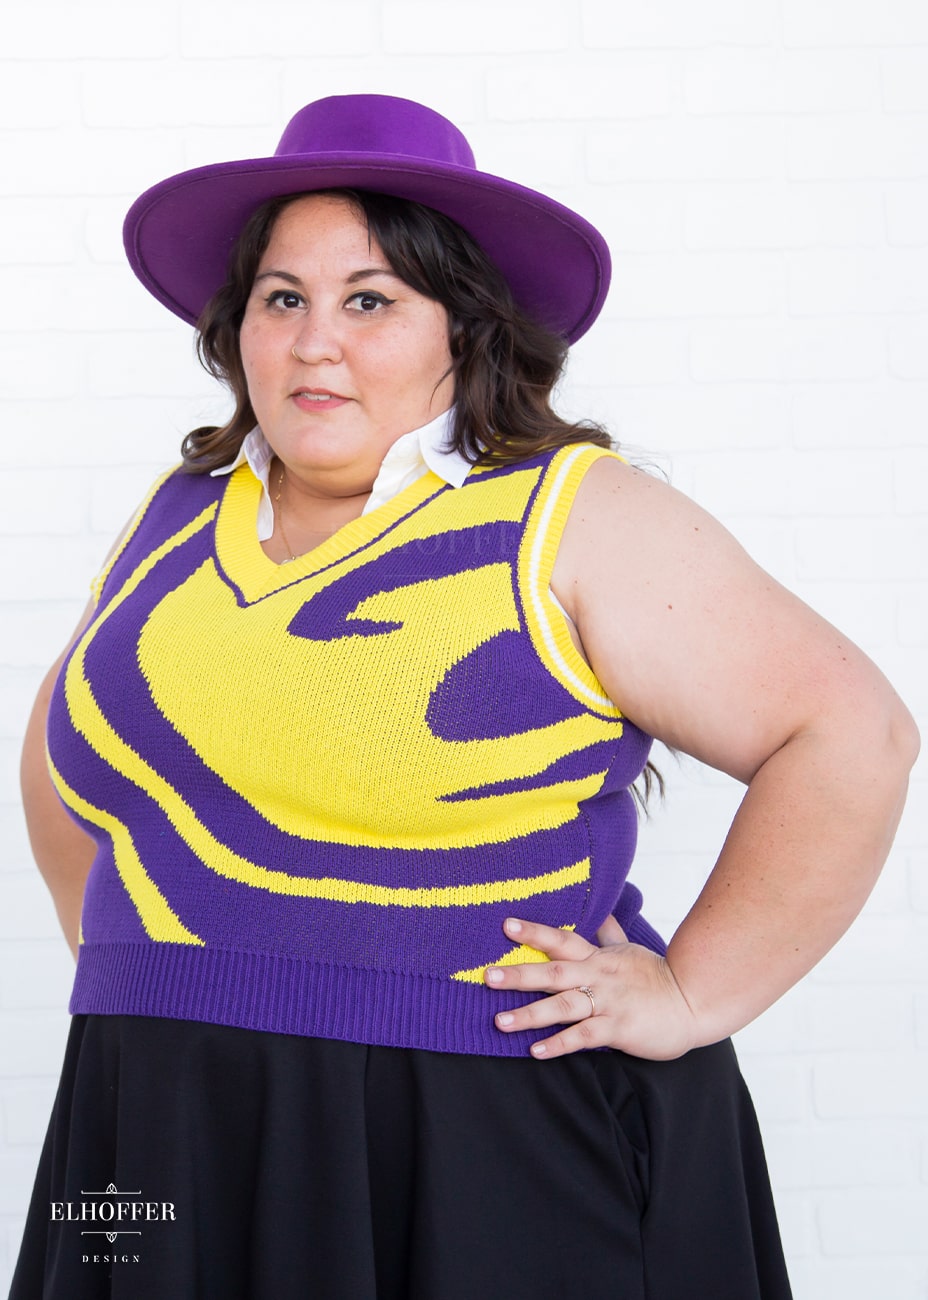 Alysia, a fair skinned, size XL model with dark brown hair, is wearing a pullover vest with a boxy fit and v-neck. It is bright purple with a yellow swirl detail across the body.